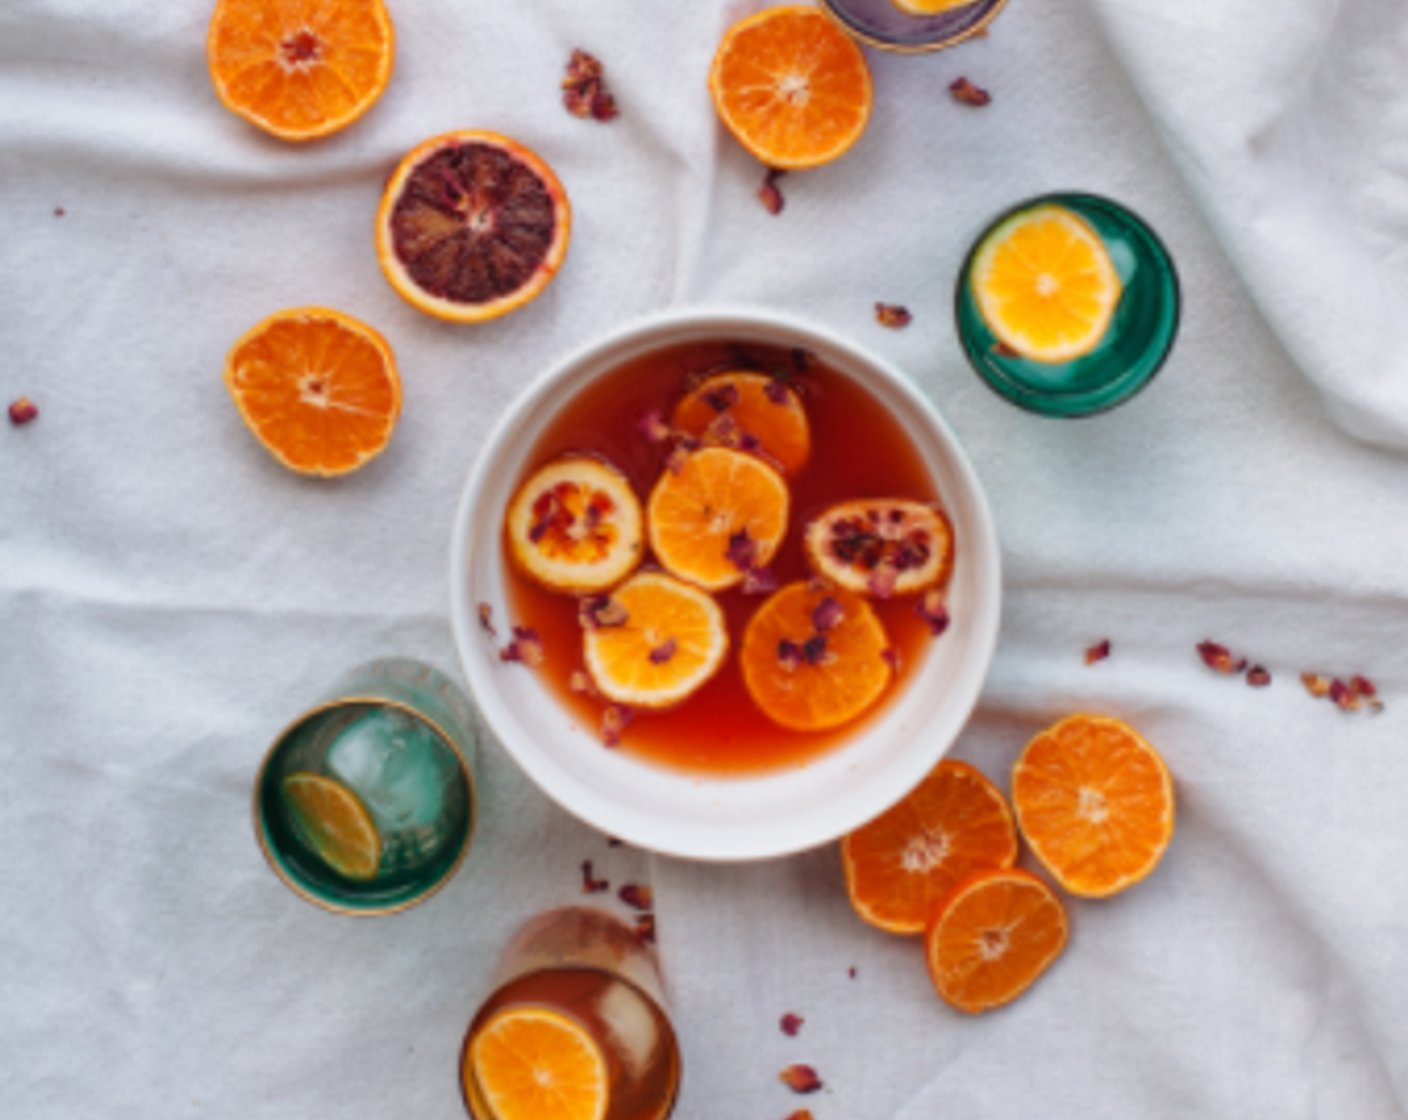 step 4 When ready to enjoy, pour 1 part Citrus Shrub Punch into glass with 1 part Club Soda (to taste). Garnish with Oranges (to taste), Madagascar Vanilla Bean (to taste), and Edible Dried Rose Petals (to taste).